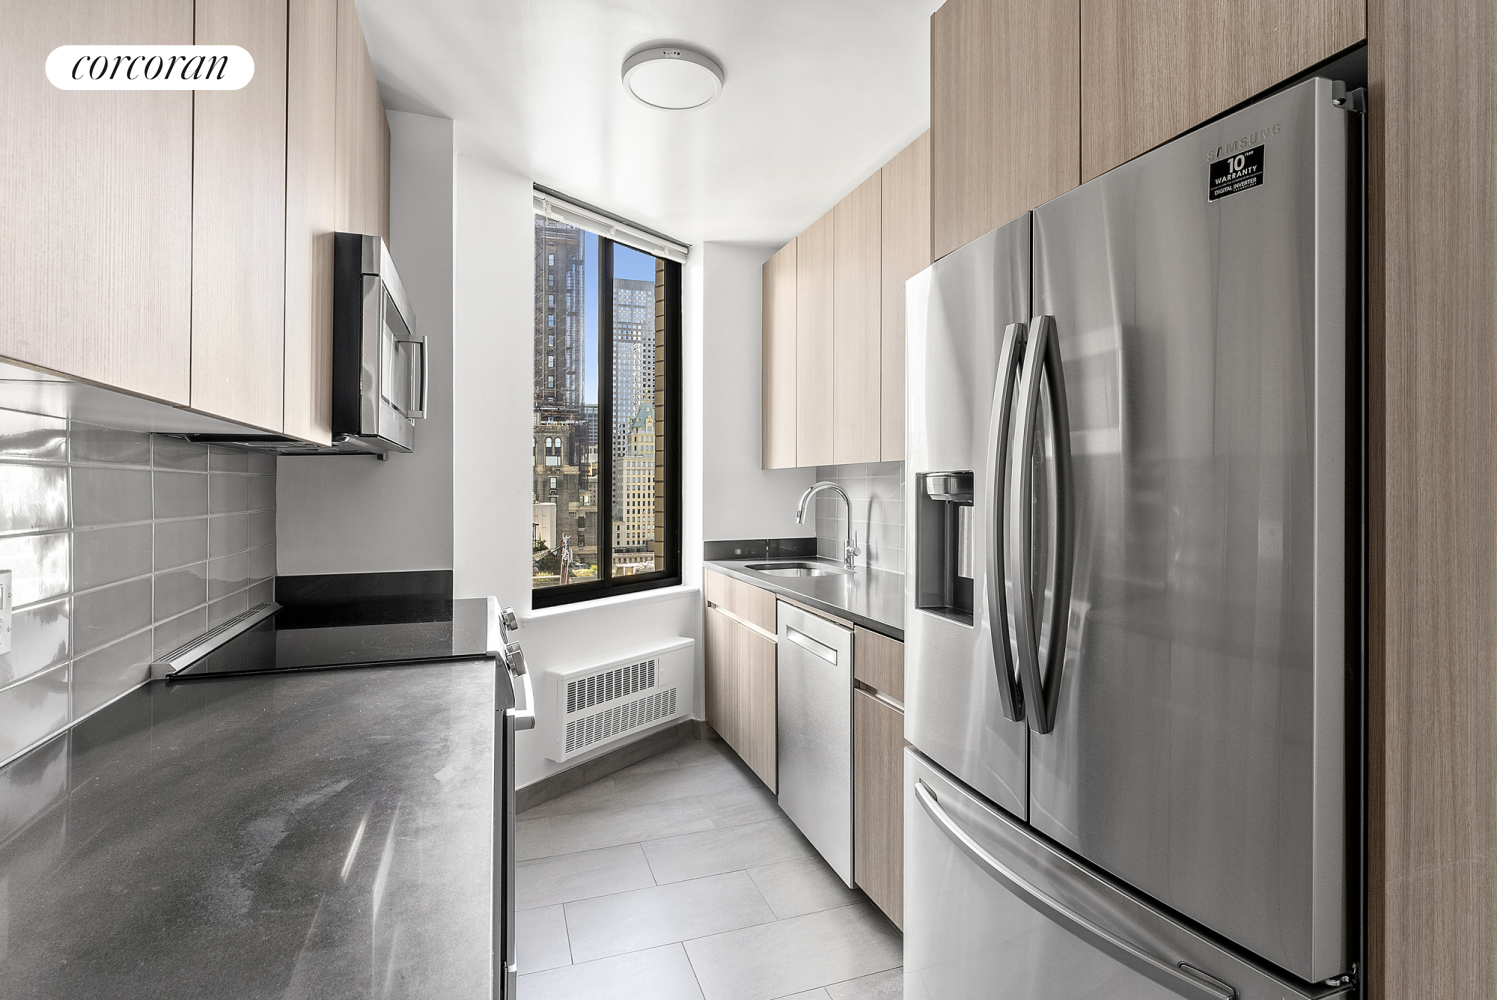 800 5th Avenue 26C, Lenox Hill, Upper East Side, NYC - 2 Bedrooms  
2 Bathrooms  
4 Rooms - 